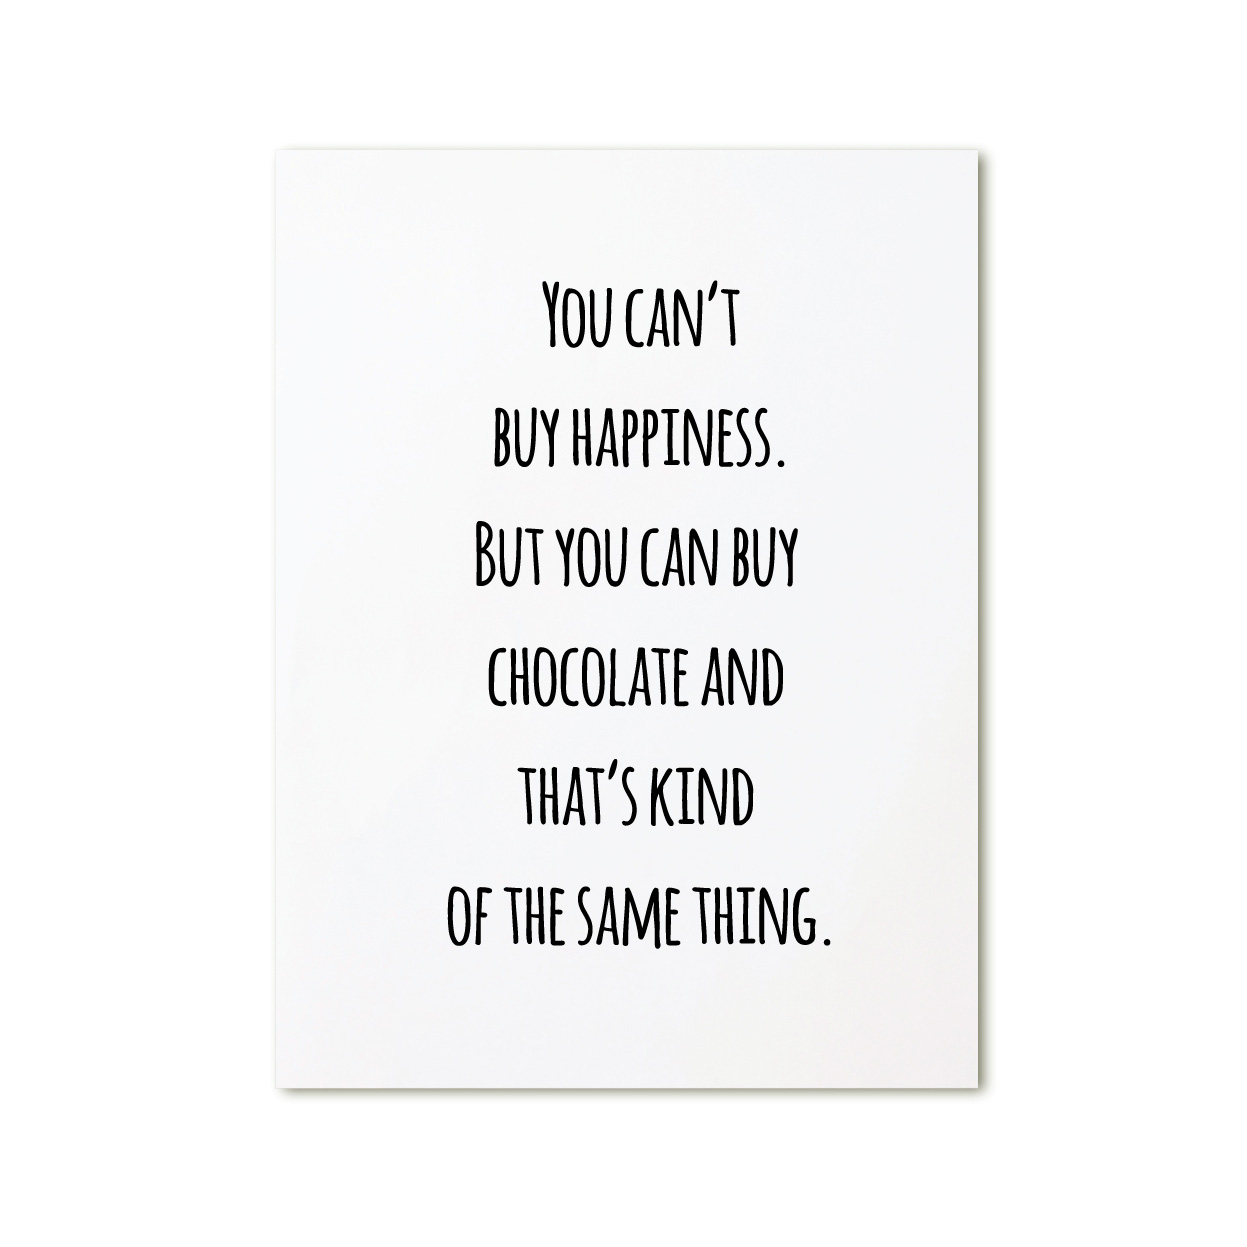 zoedt-kaart-you-can't-buy-happiness